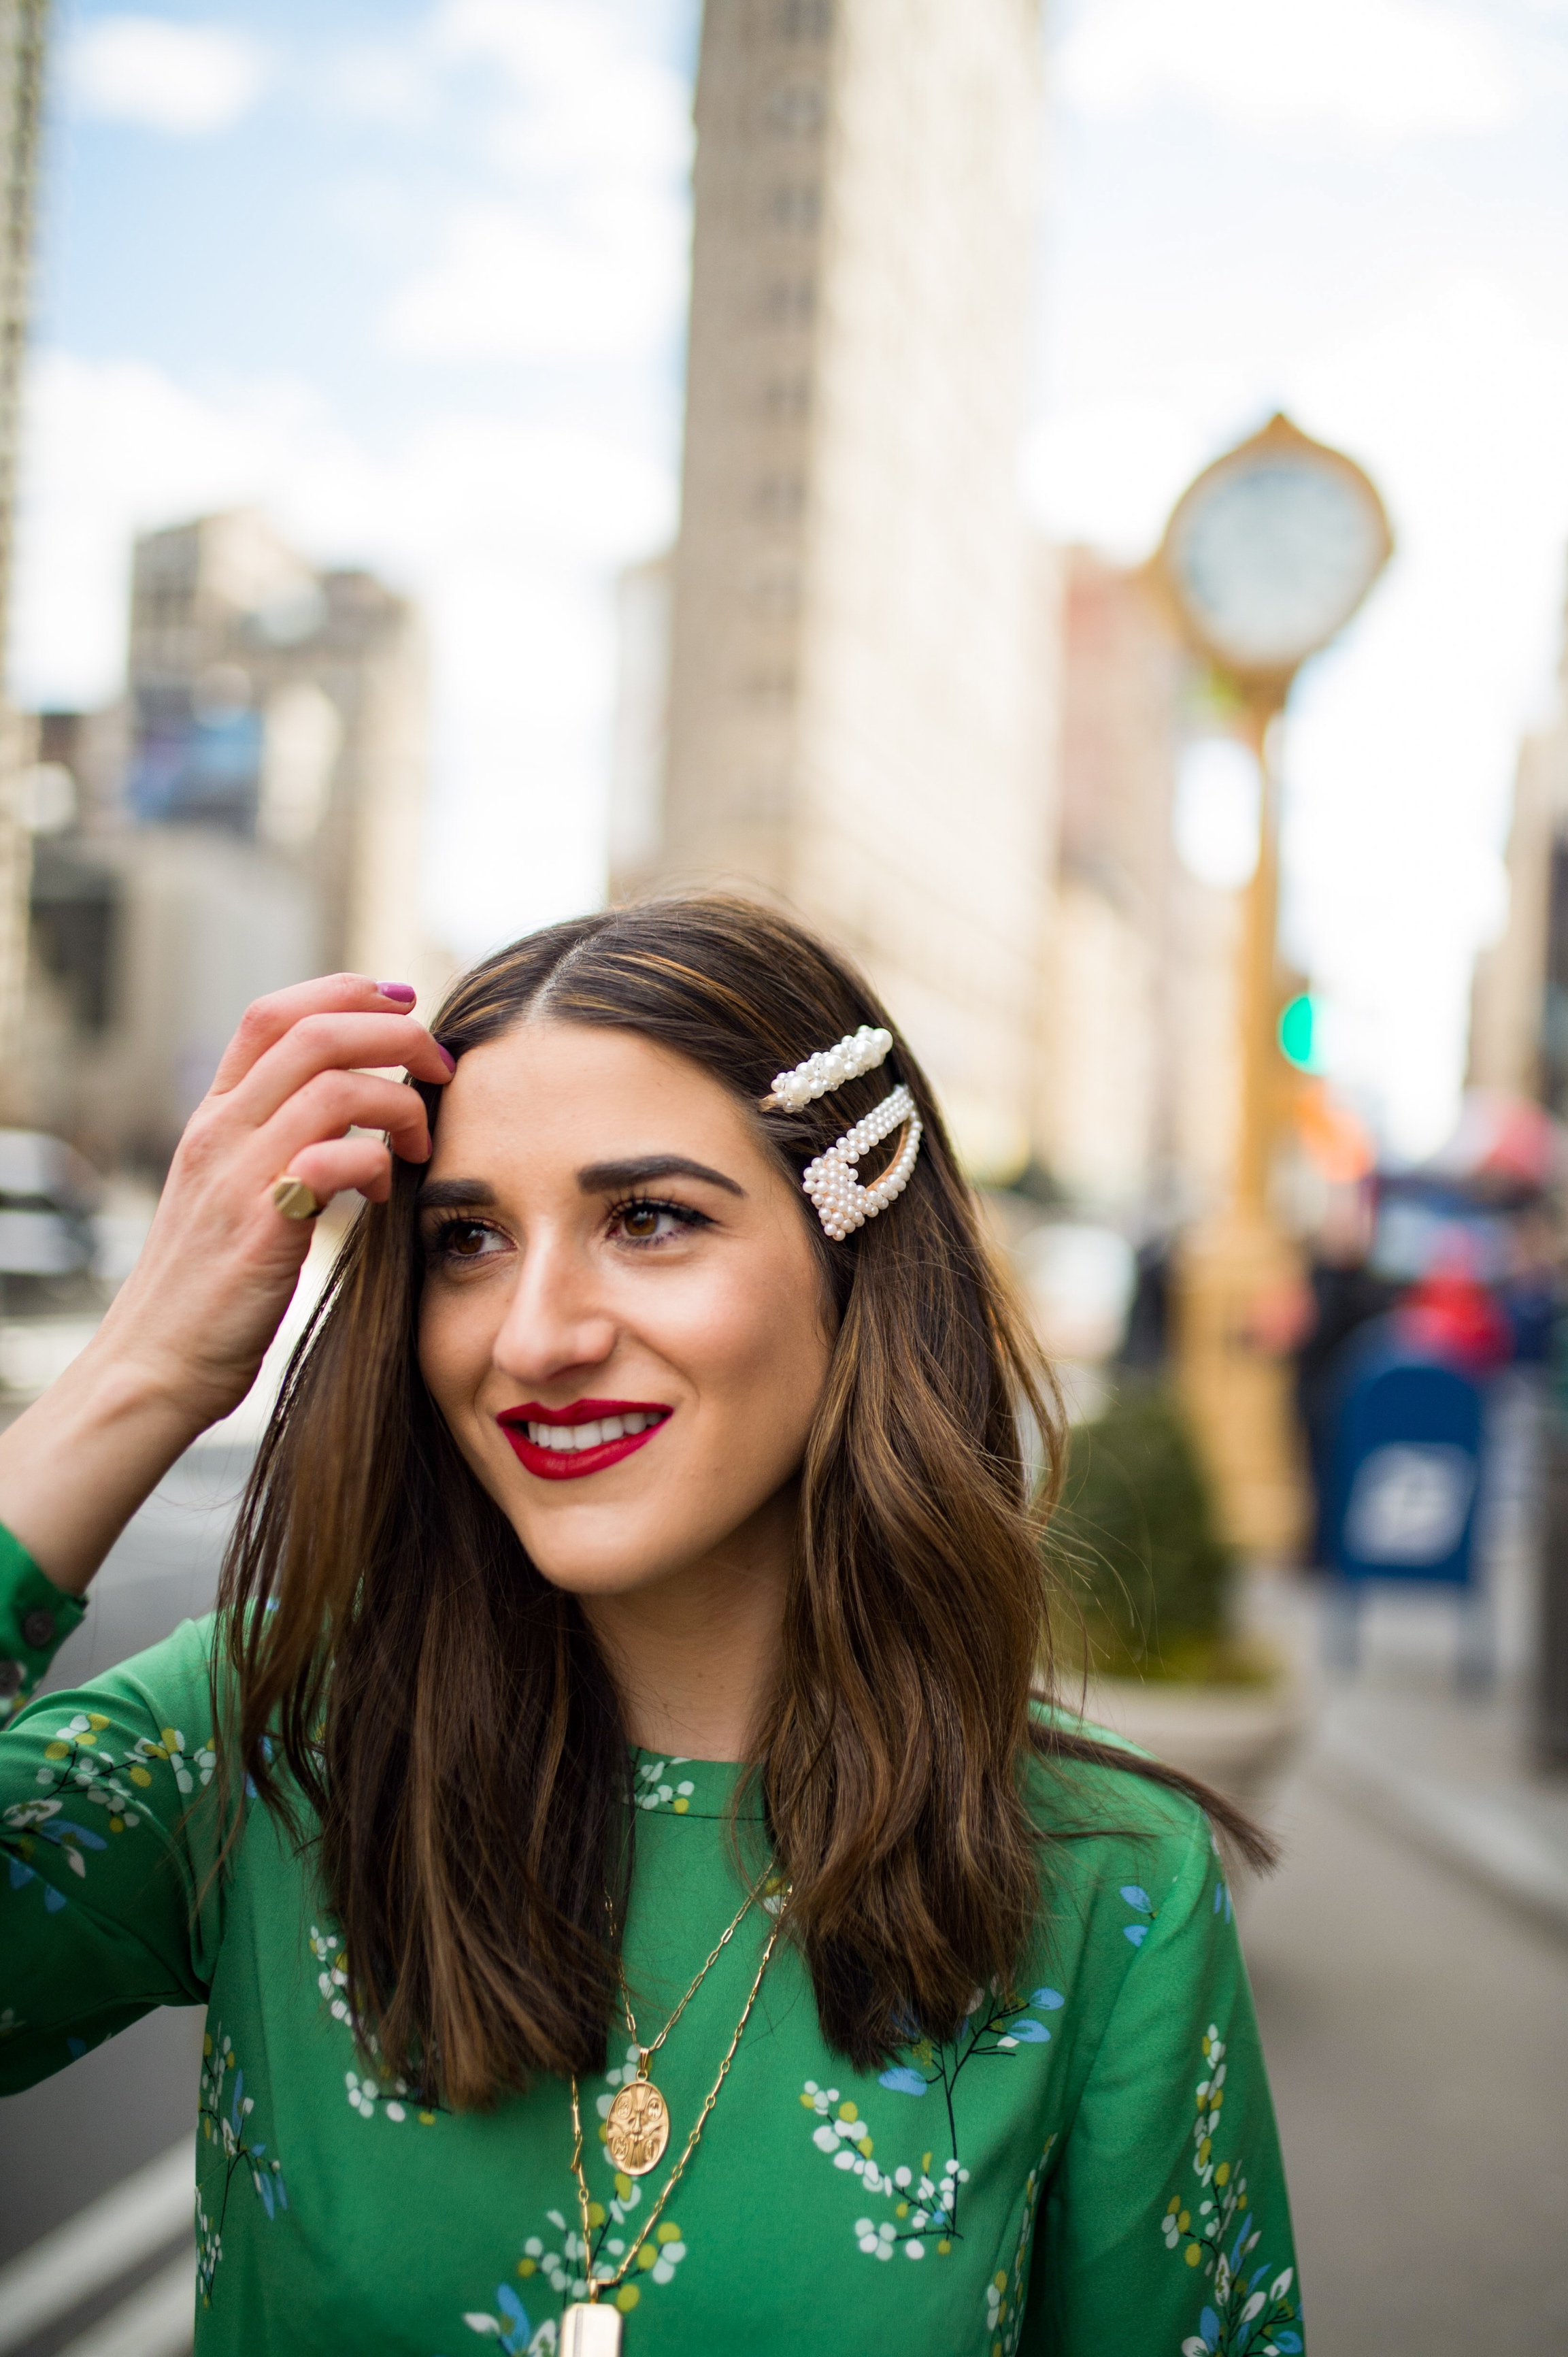 Fresh Cut And Color Sharon Dorram Color at Sally Hershberger Esther Santer Fashion Blog NYC Street Style Blogger Outfit OOTD Trendy Shop Balayage Honey Highlights New York City Upscale Salon Green Floral Dress Spring Pearl Barrettes Hair  Accessories.JPG